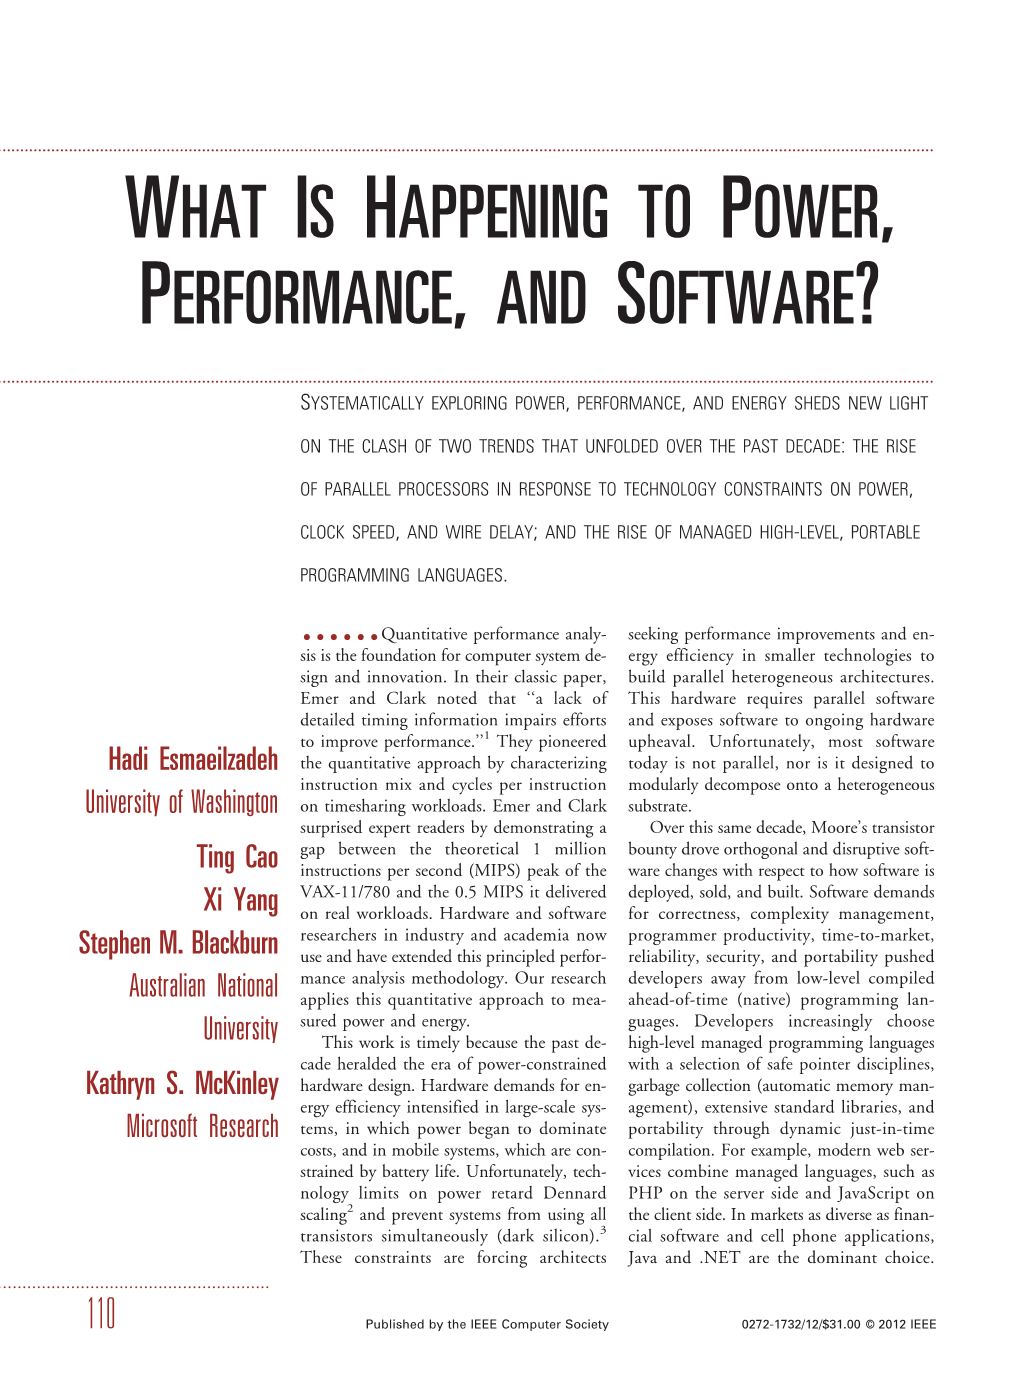 What Is Happening to Power, Performance, and Software?